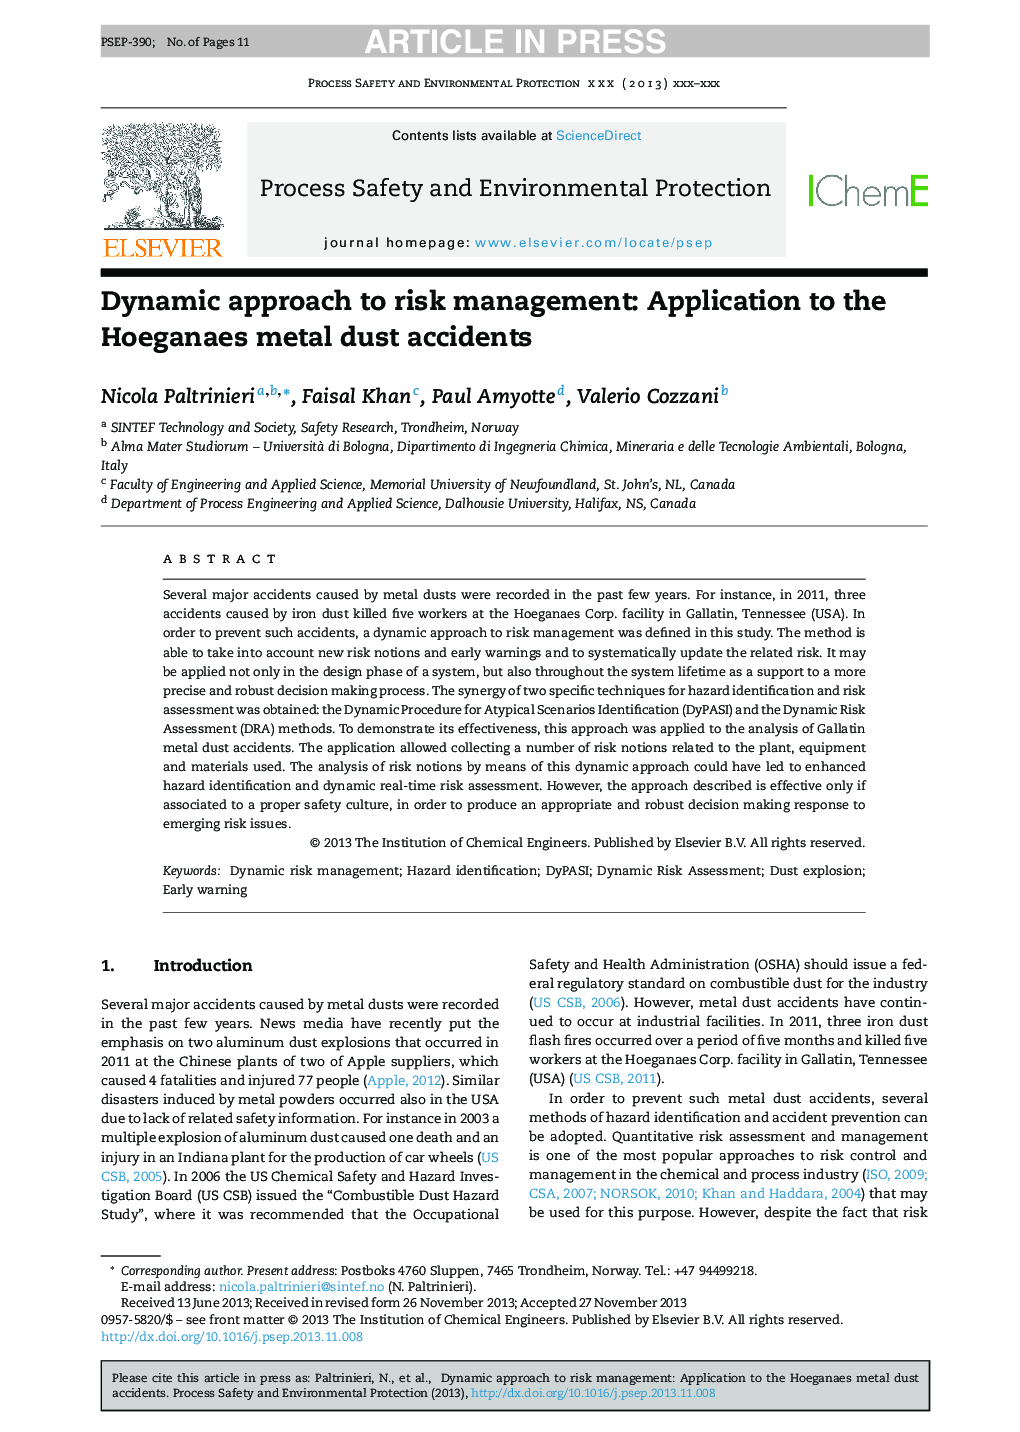 Dynamic approach to risk management: Application to the Hoeganaes metal dust accidents